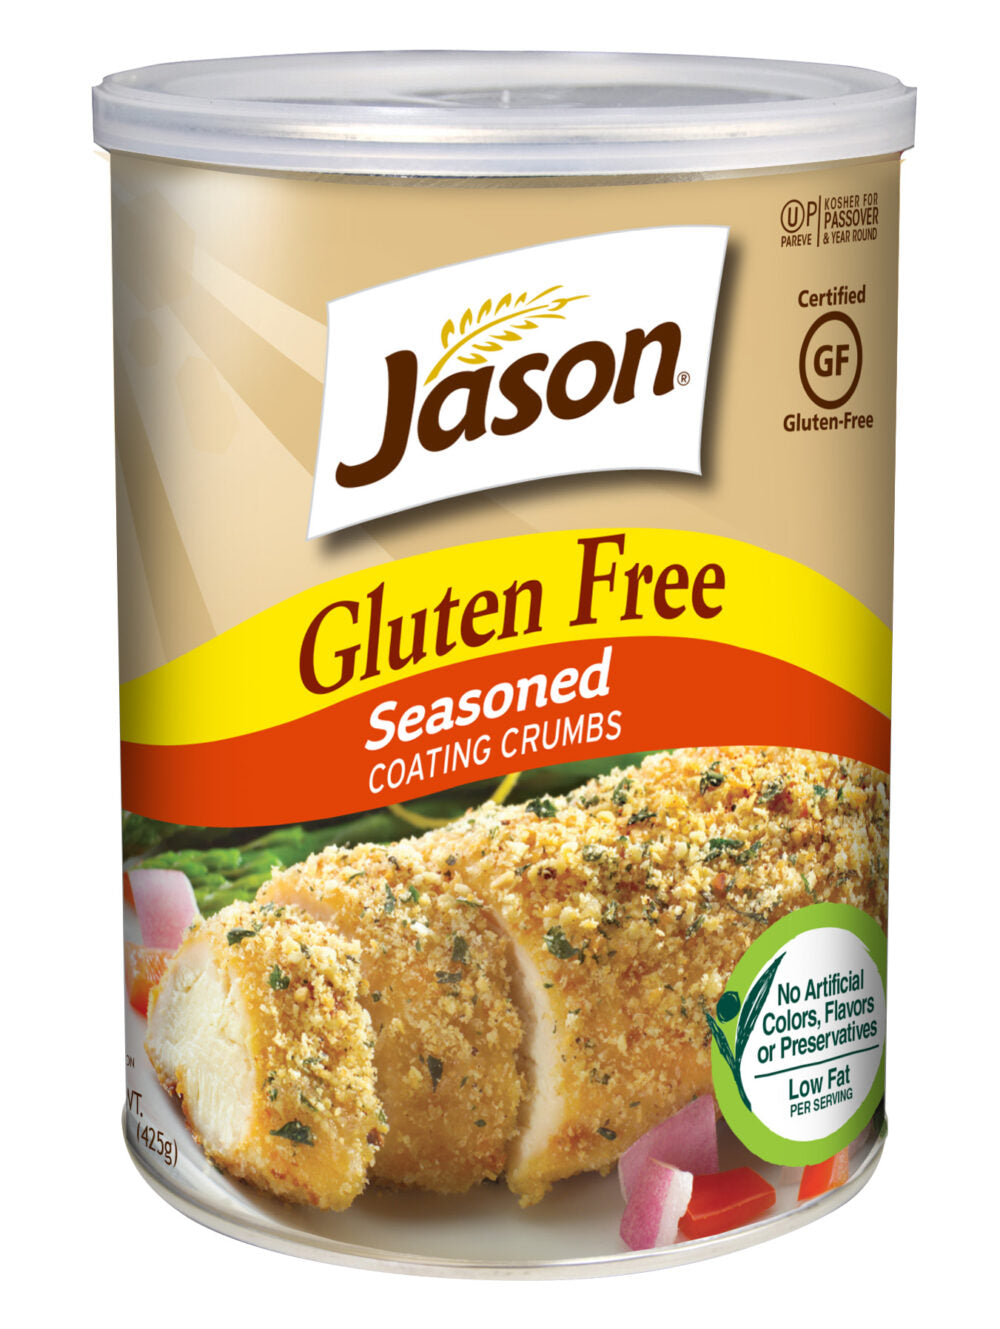 Jason Gluten-Free Seasoned Crumbs - 425 g | Resealable Container for Deliciously Crispy Coating